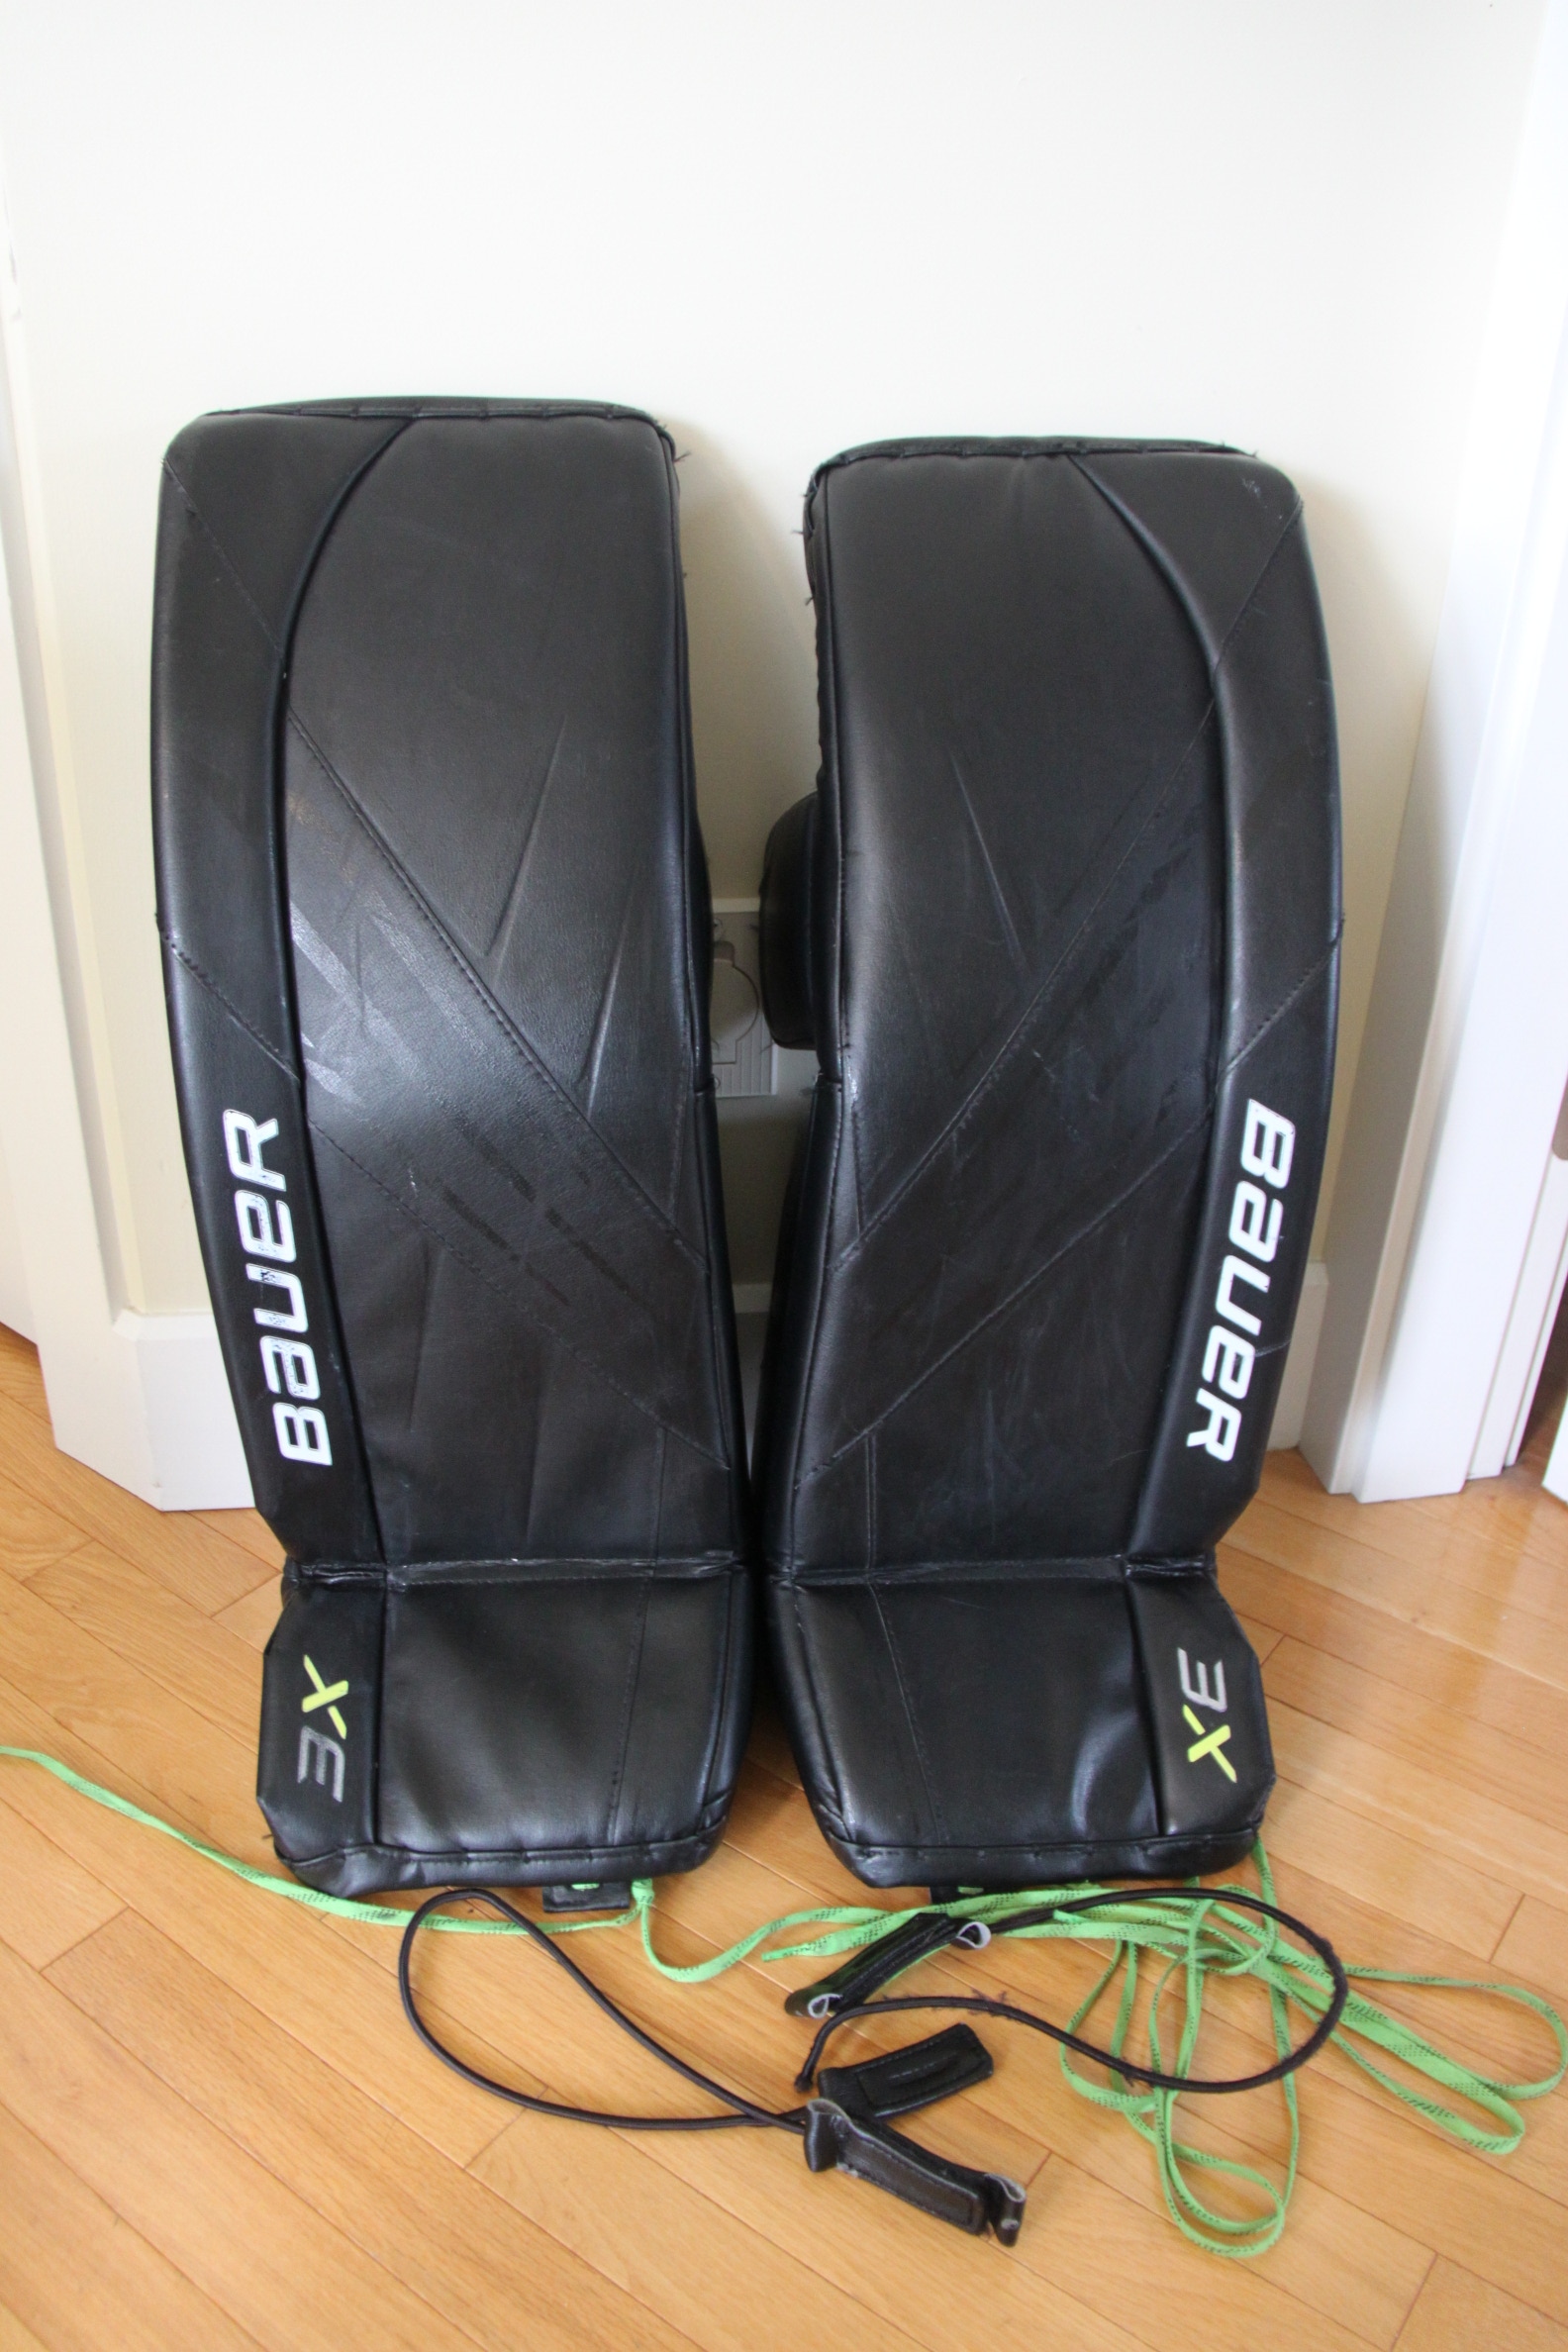 Used Large (32") Bauer Vapor 3X Goalie Leg Pads in Great Condition